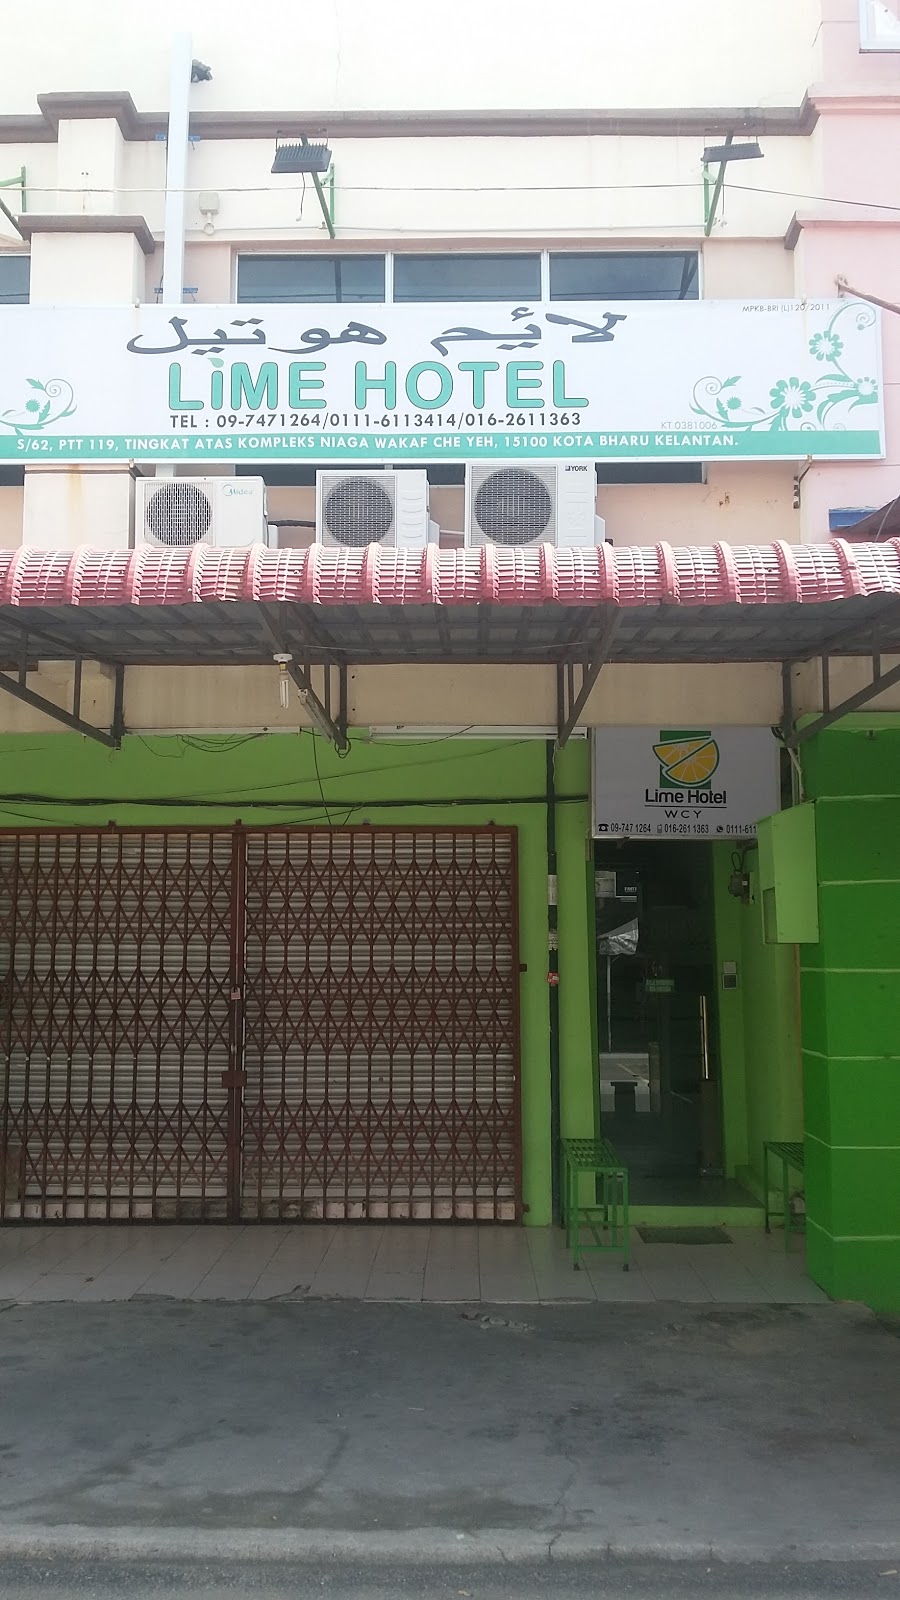 Lime Hotel